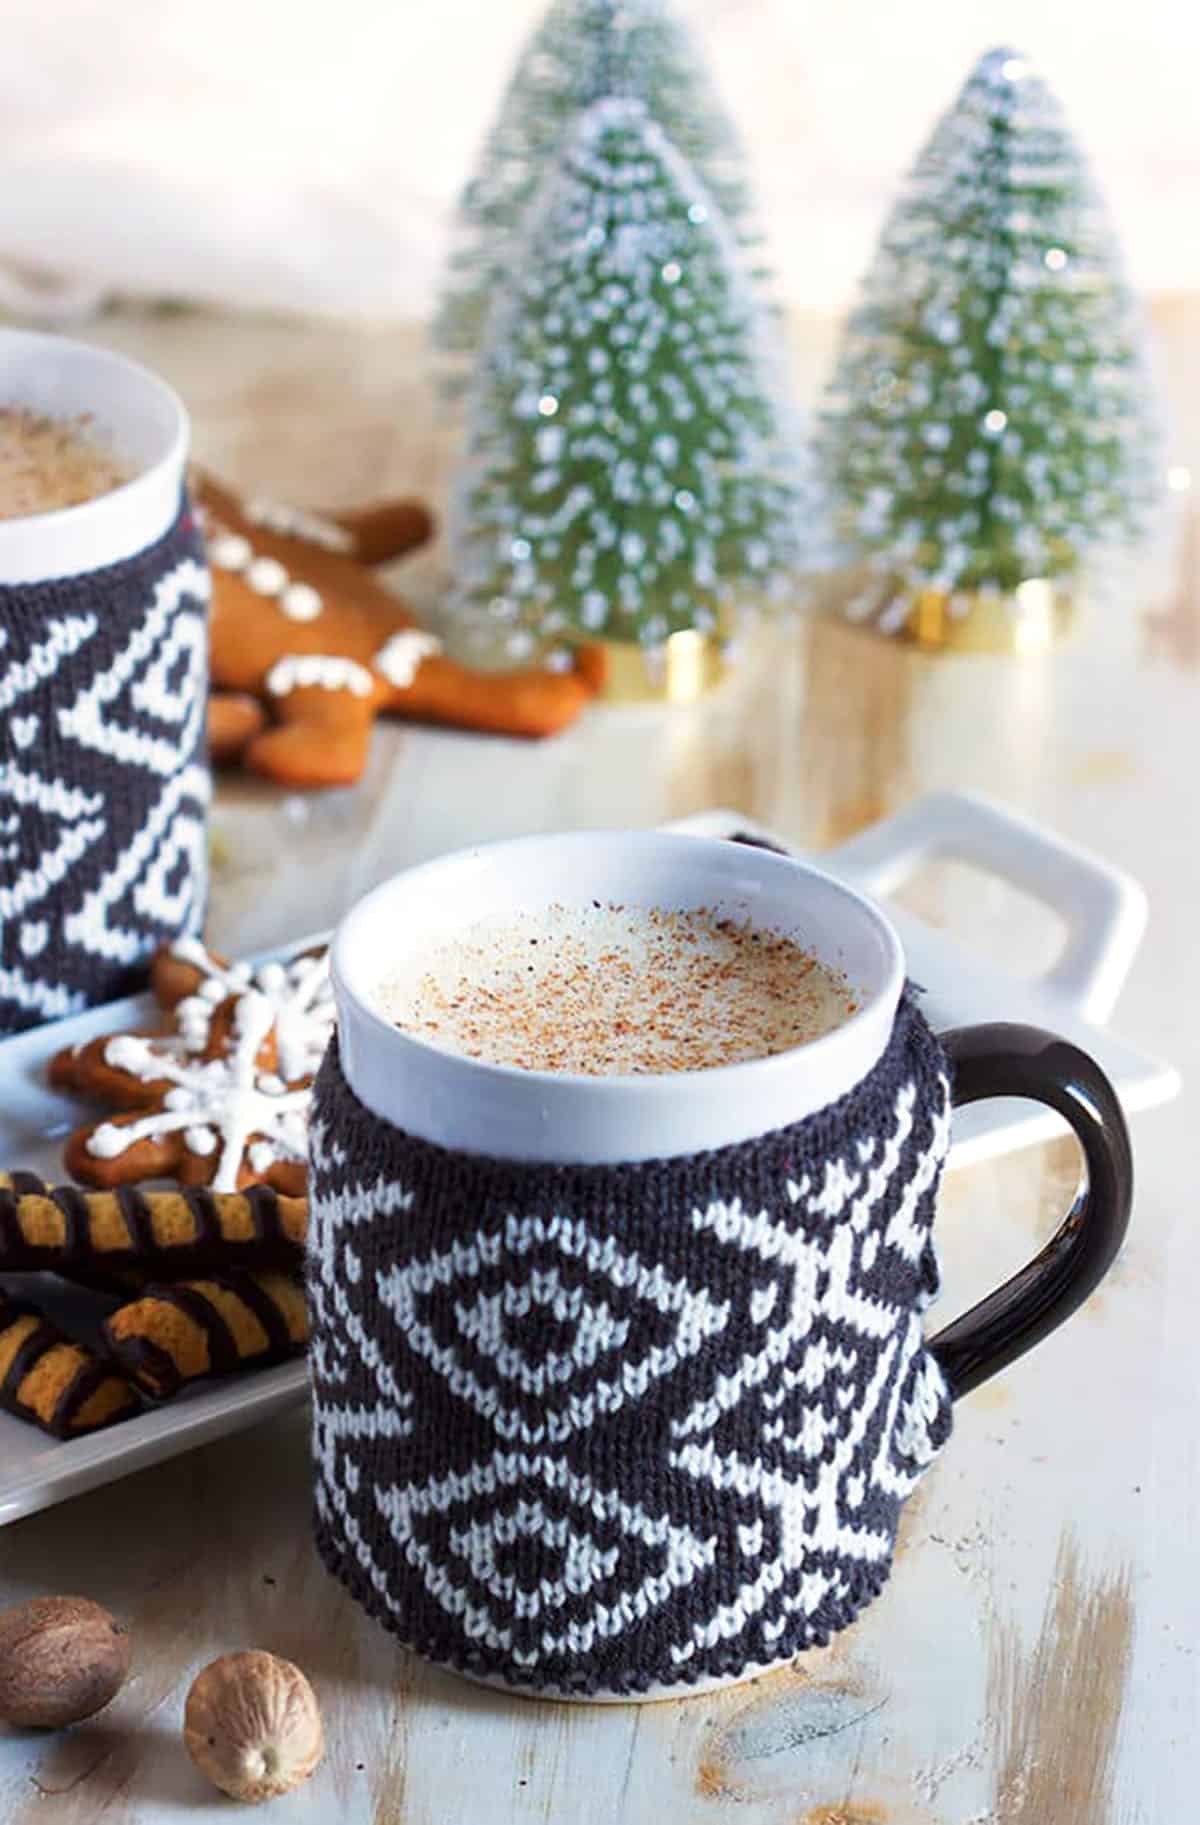 Mug with a knit cozy filled with eggnog with two bottle brush trees in the background.